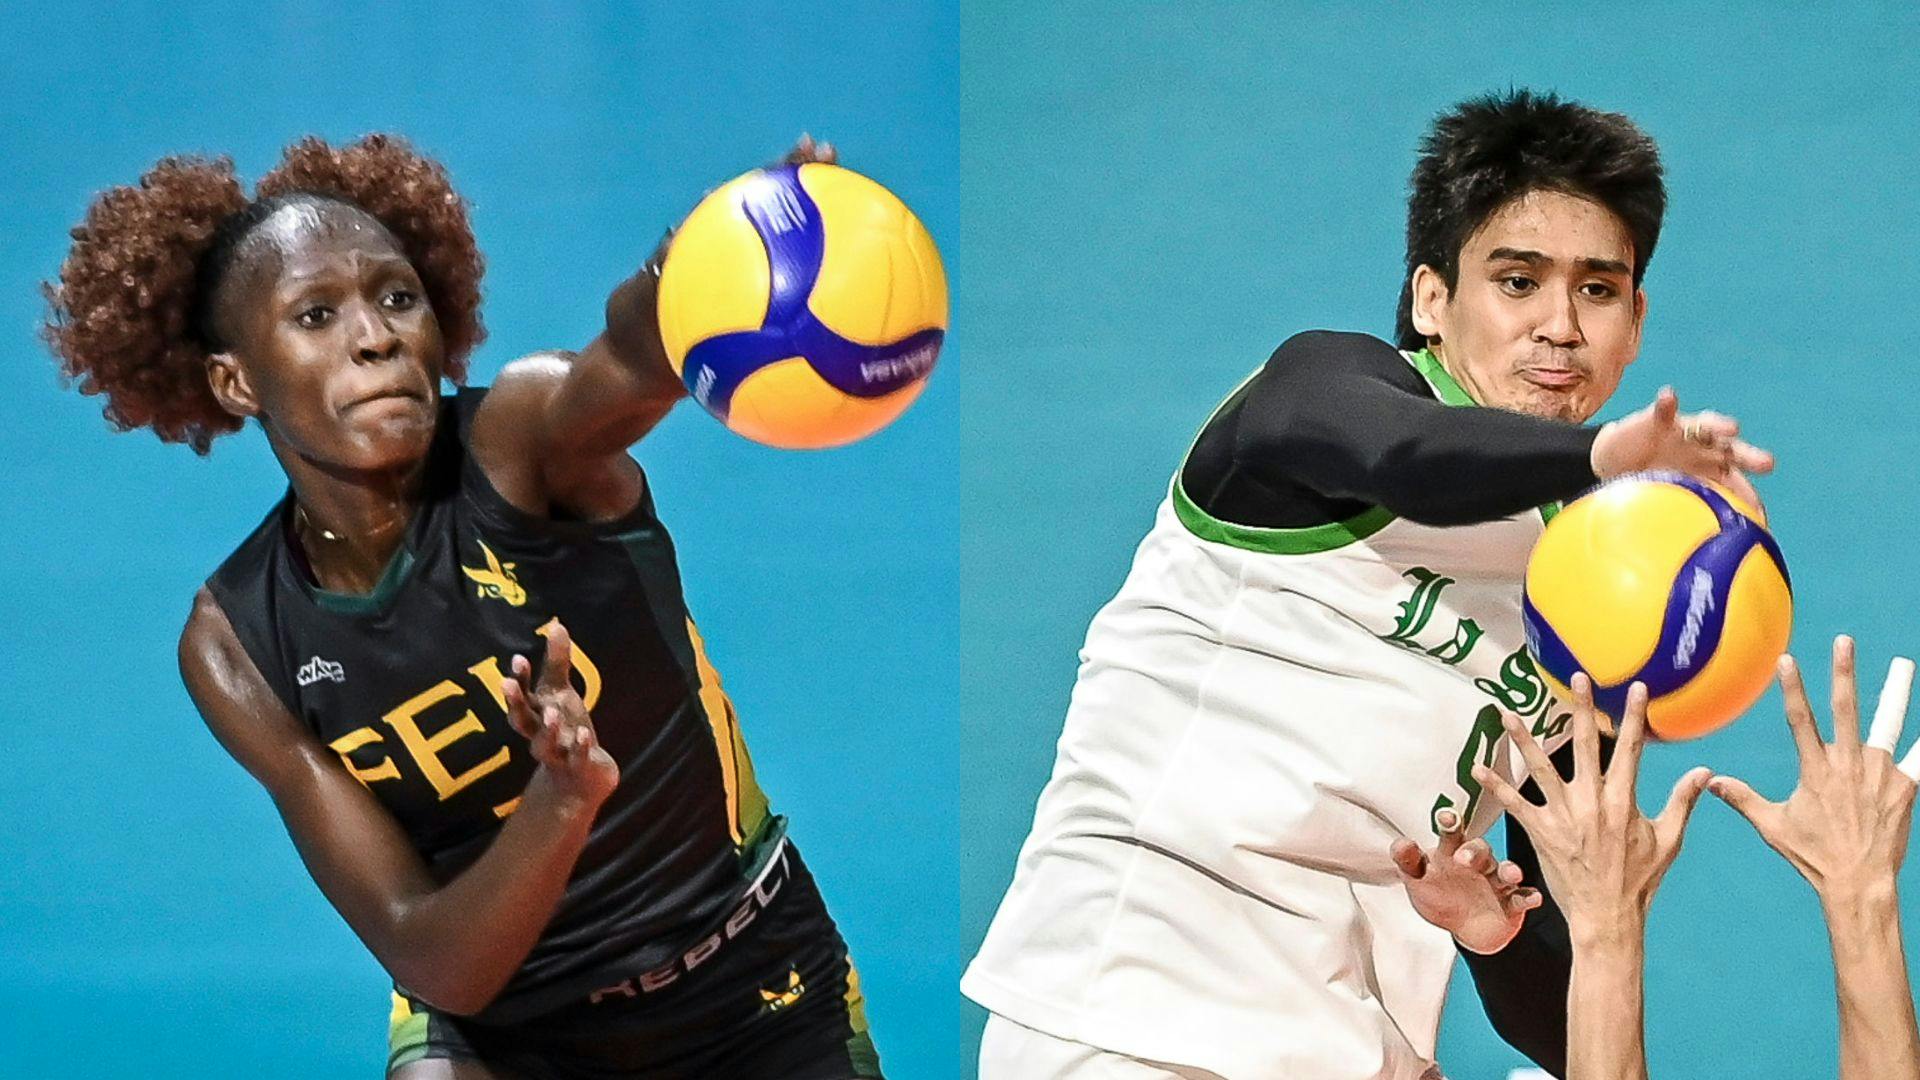 Clutch performers: Faida Bakanke, Noel Kampton selected as UAAP Players of the Week after delivering crucial wins